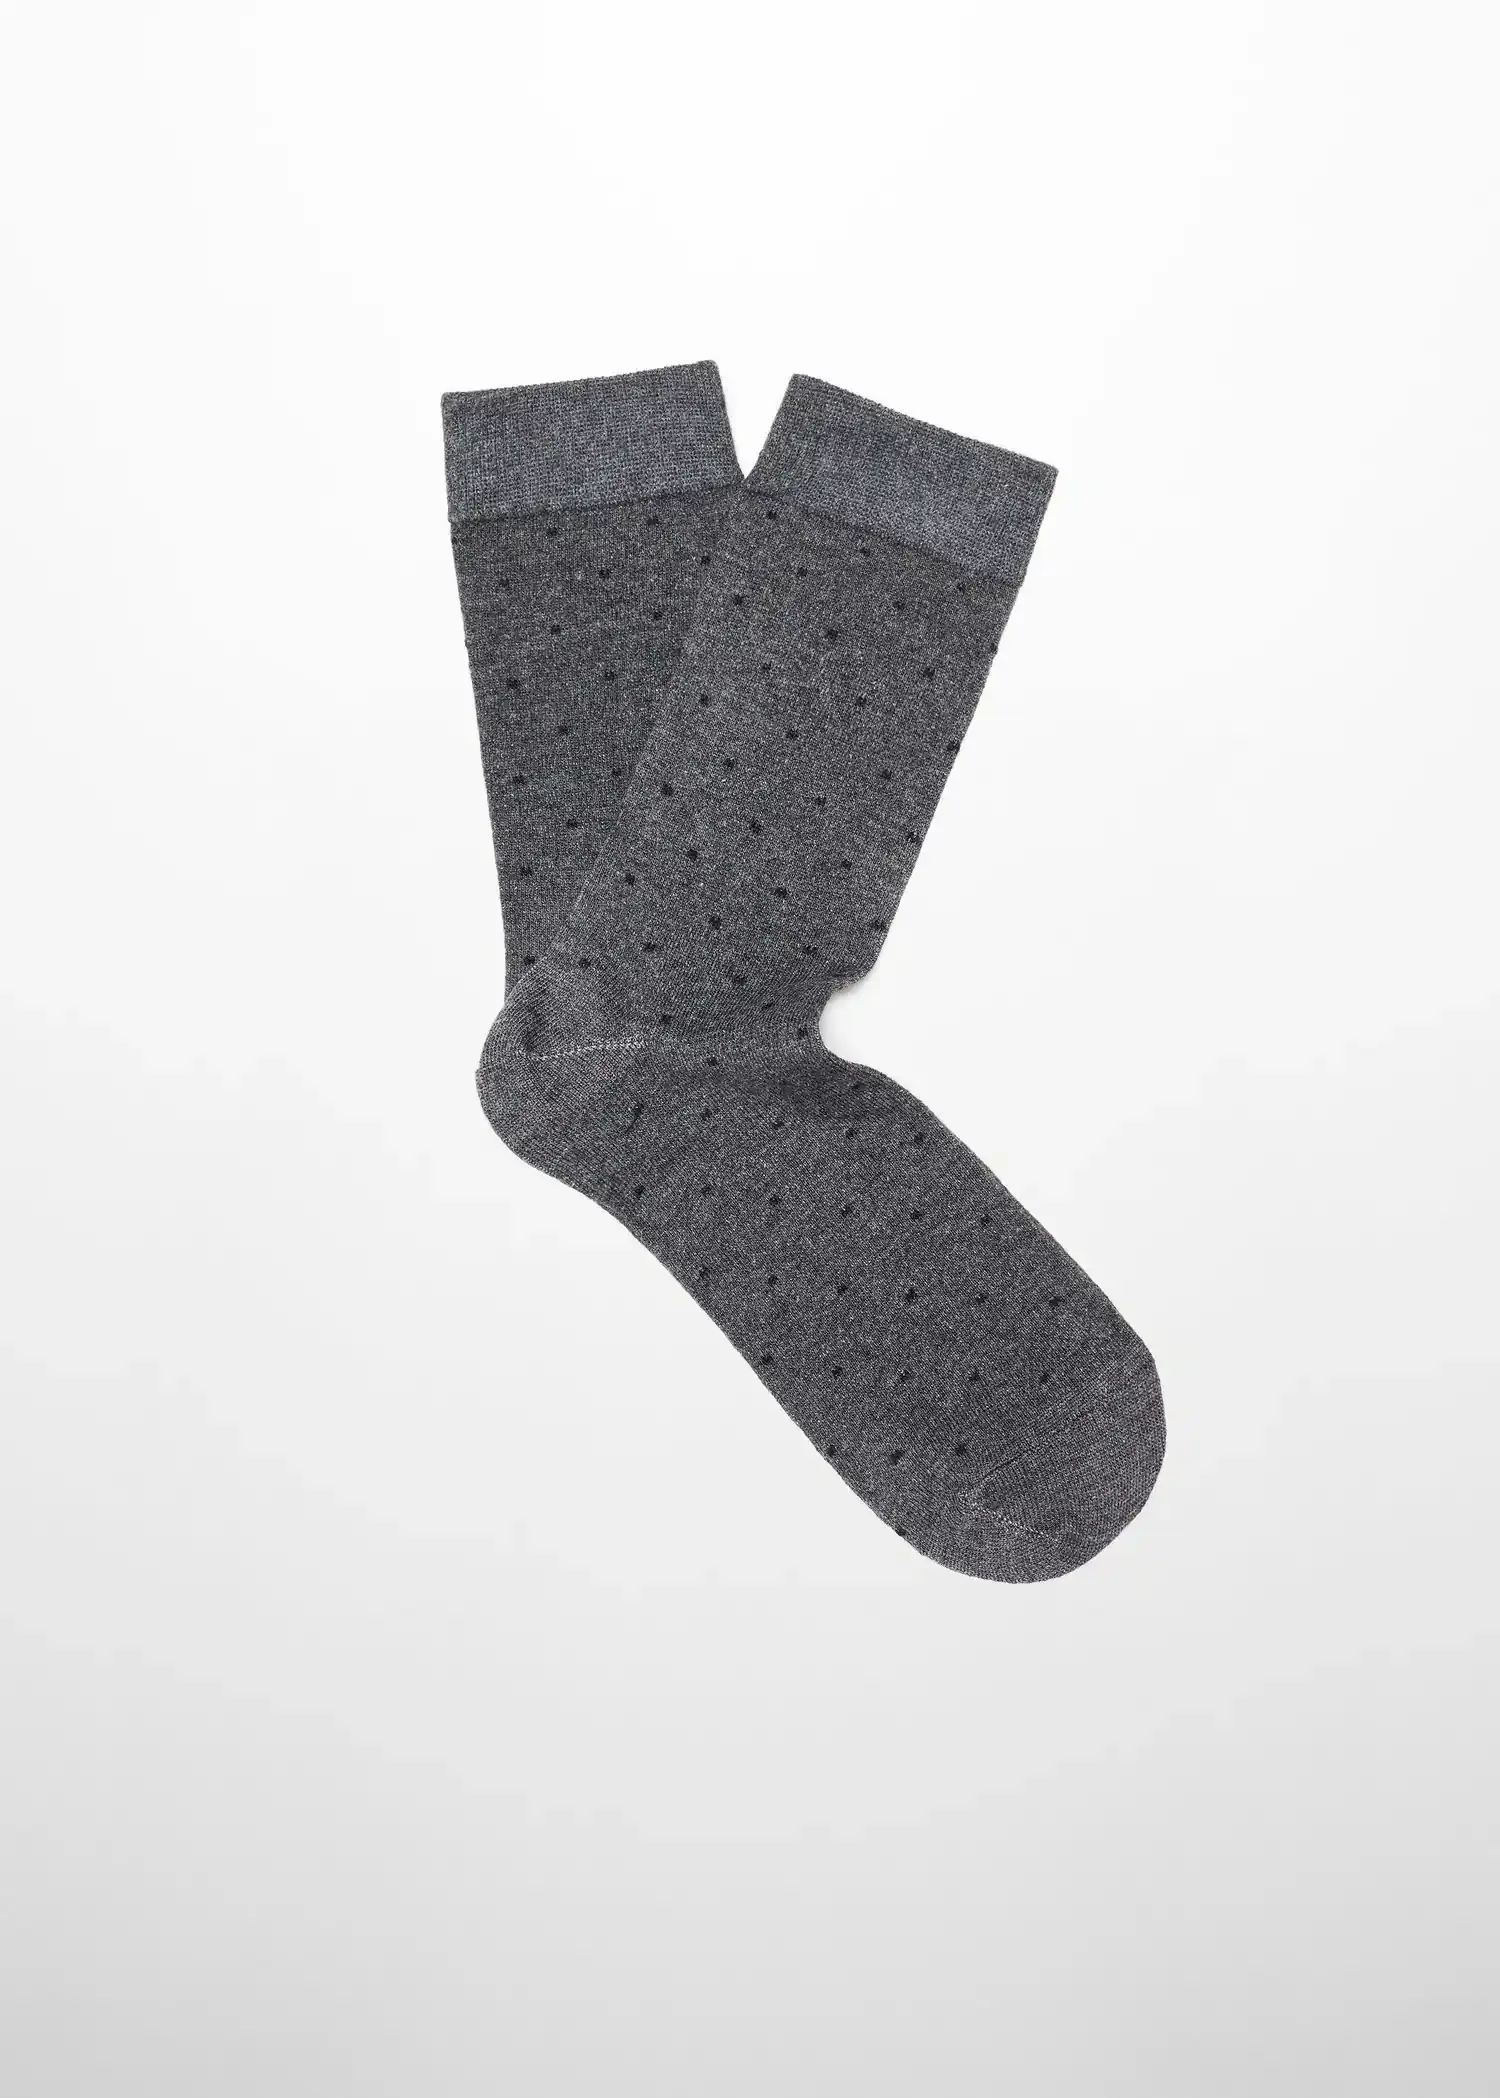 Mango Cotton socks with embroidered detail. 3